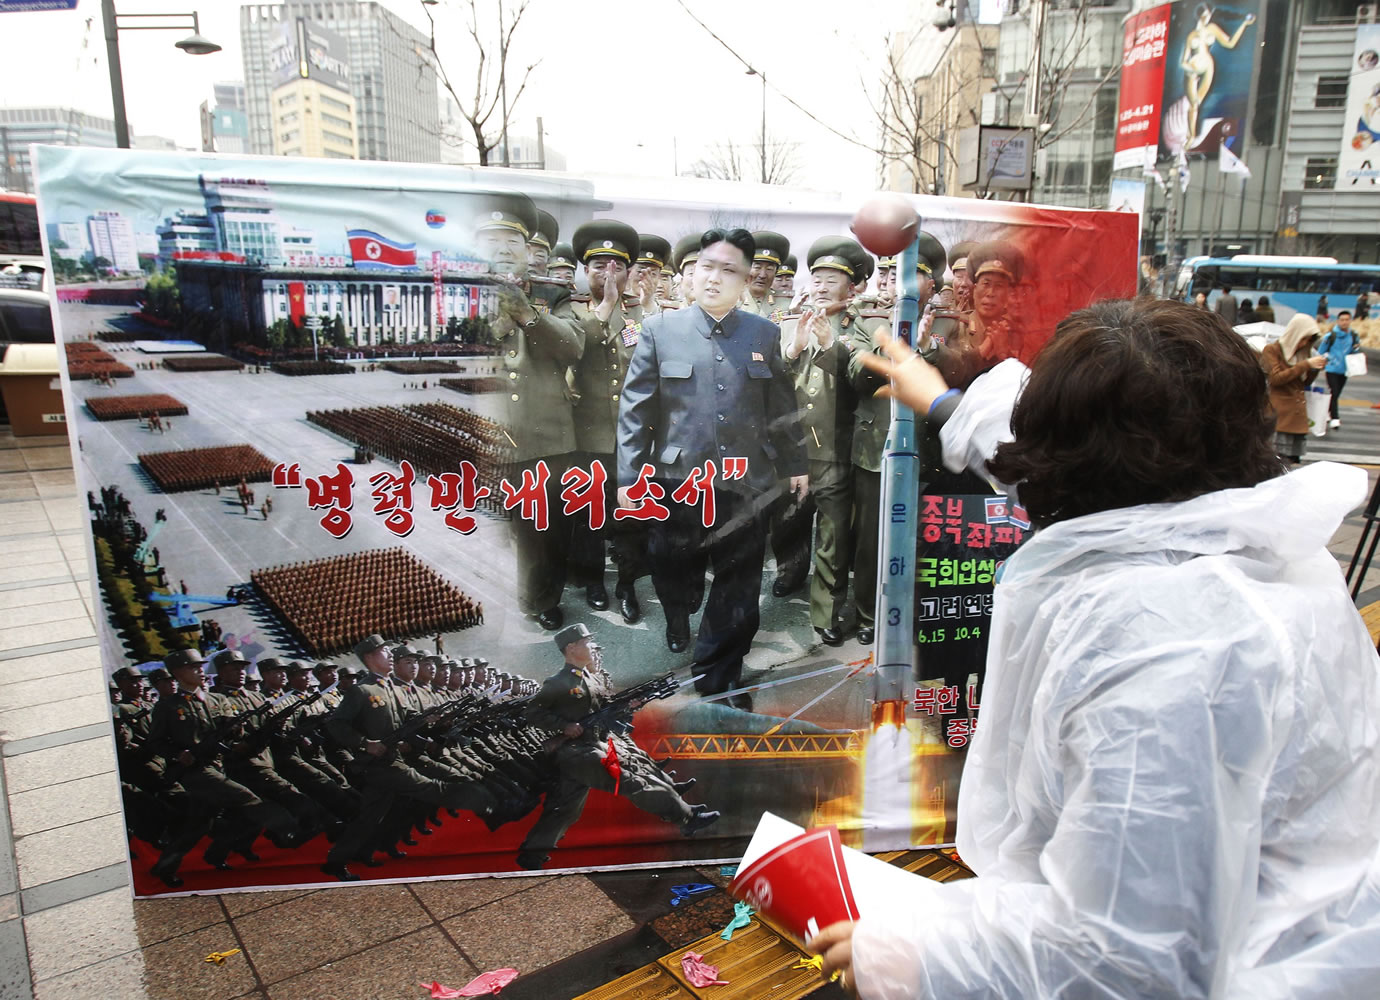 A South Korean conservative activist hurls a water balloon at a portrait of North Korean leader Kim Jong Un during a rally denouncing North Korea's recent threat for war in Seoul, South Korea, on Tuesday.